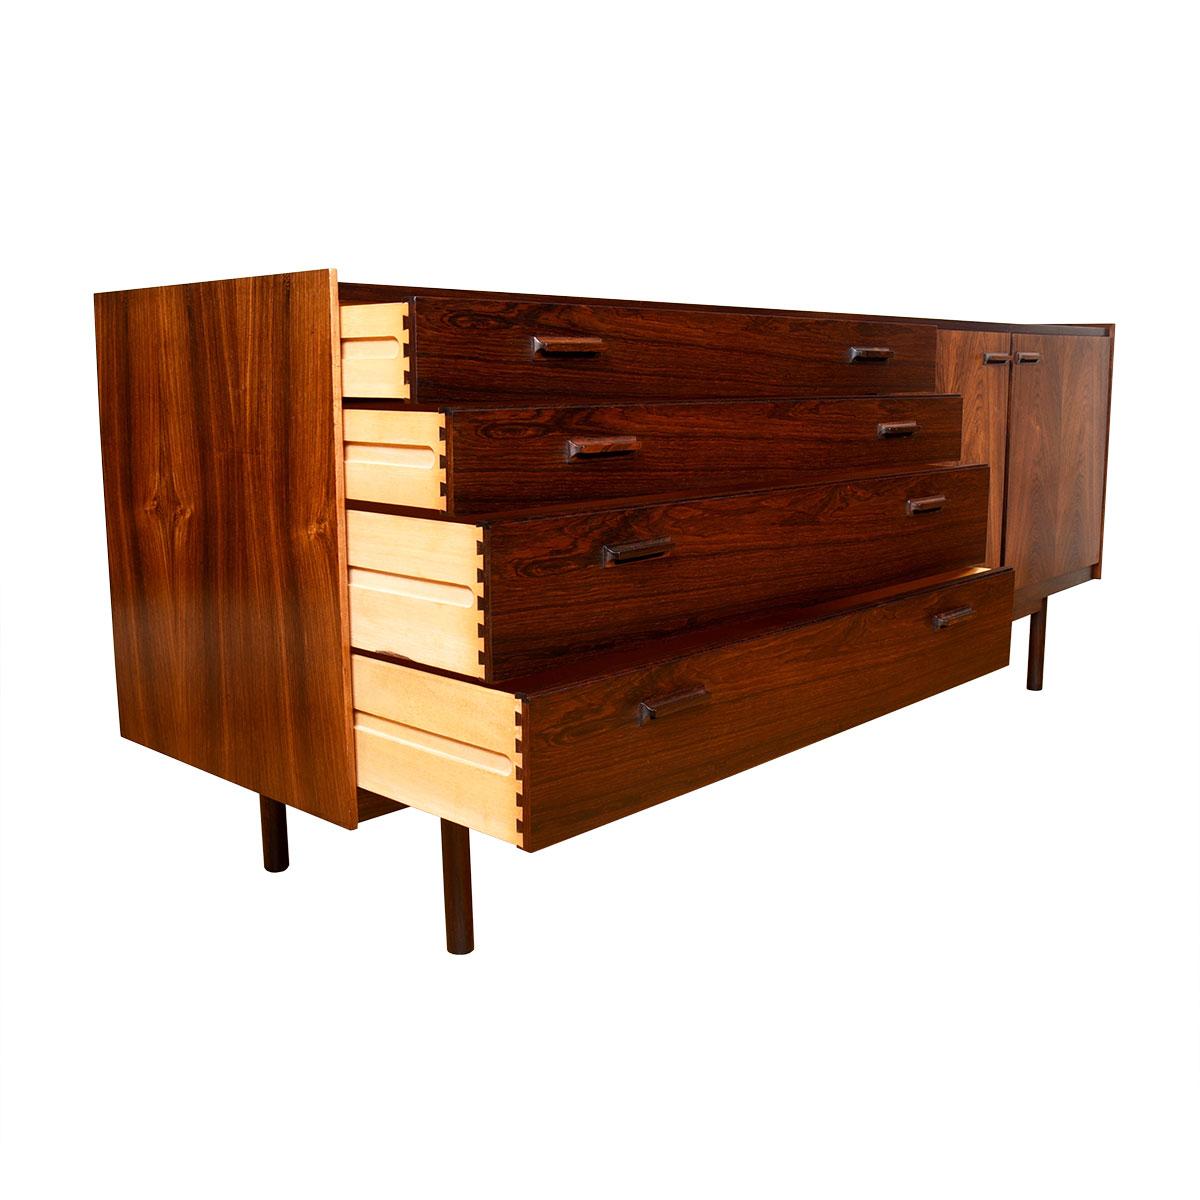 Refined lines and proportions are the defining feature of this incredible credenza in rosewood. Four graduated drawers on the left.
Two doors opening to cabinet storage on the right. Raised lip edge.
Decorative use of the placement of the graining